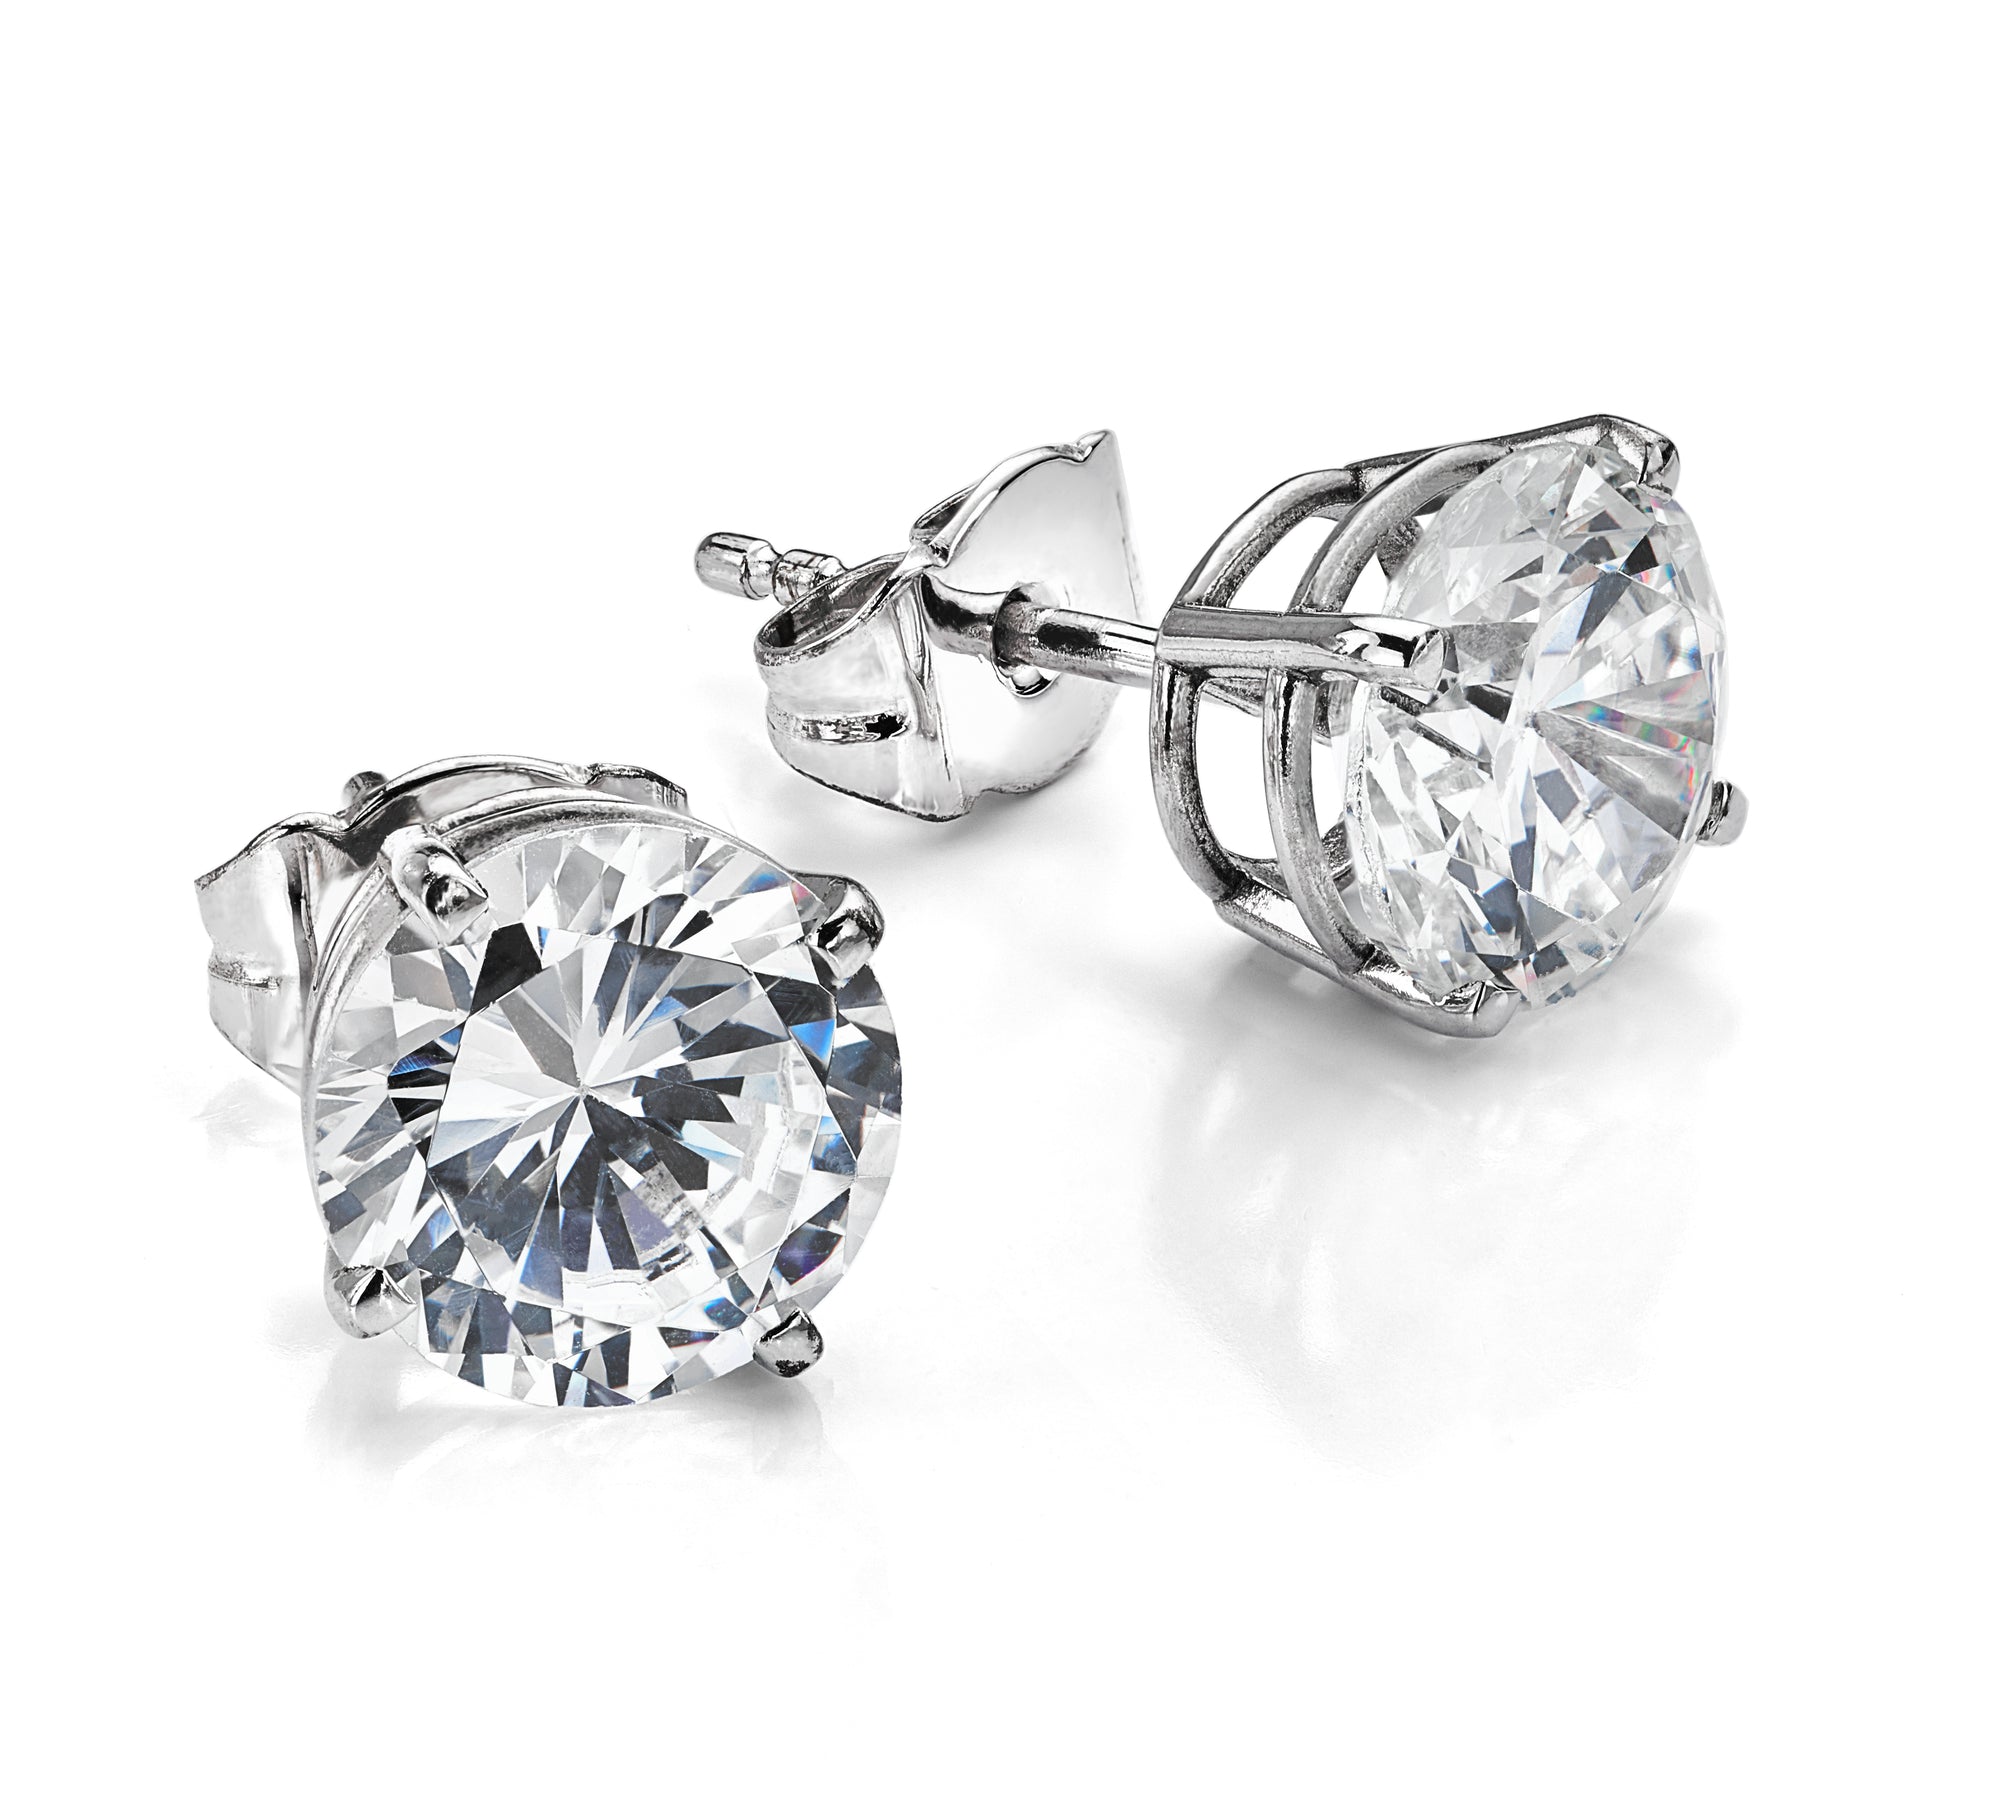 2.01 CT Certified Lab Grown Round Diamond Studs Earrings in 14k White Gold E VS2